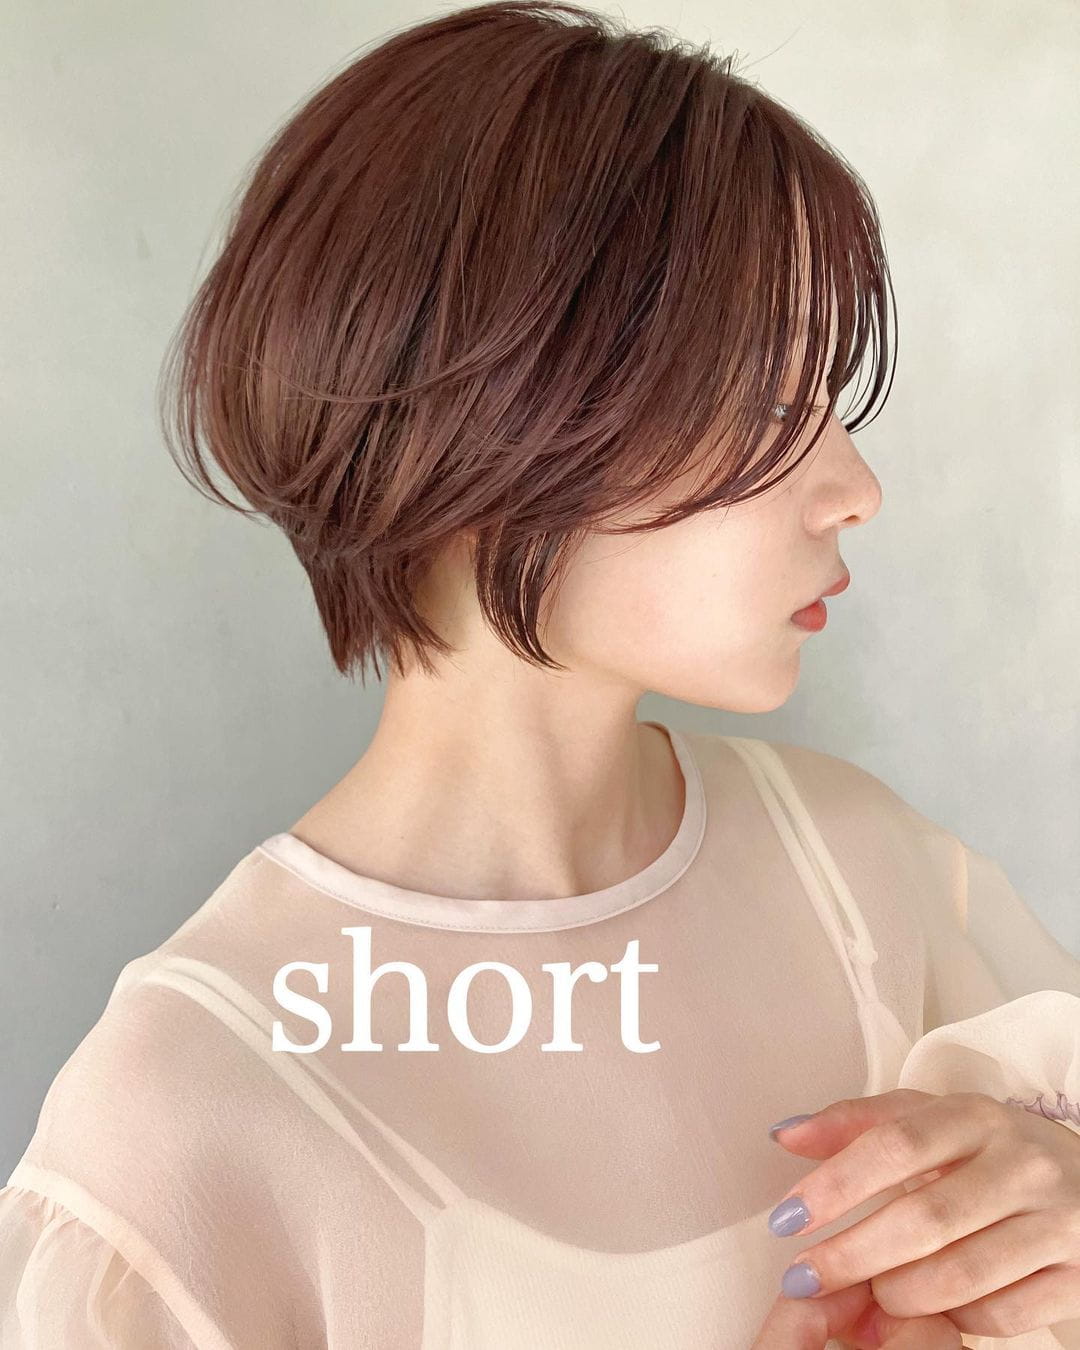 100+ Best Short Hairstyles & Haircuts For Women images 27